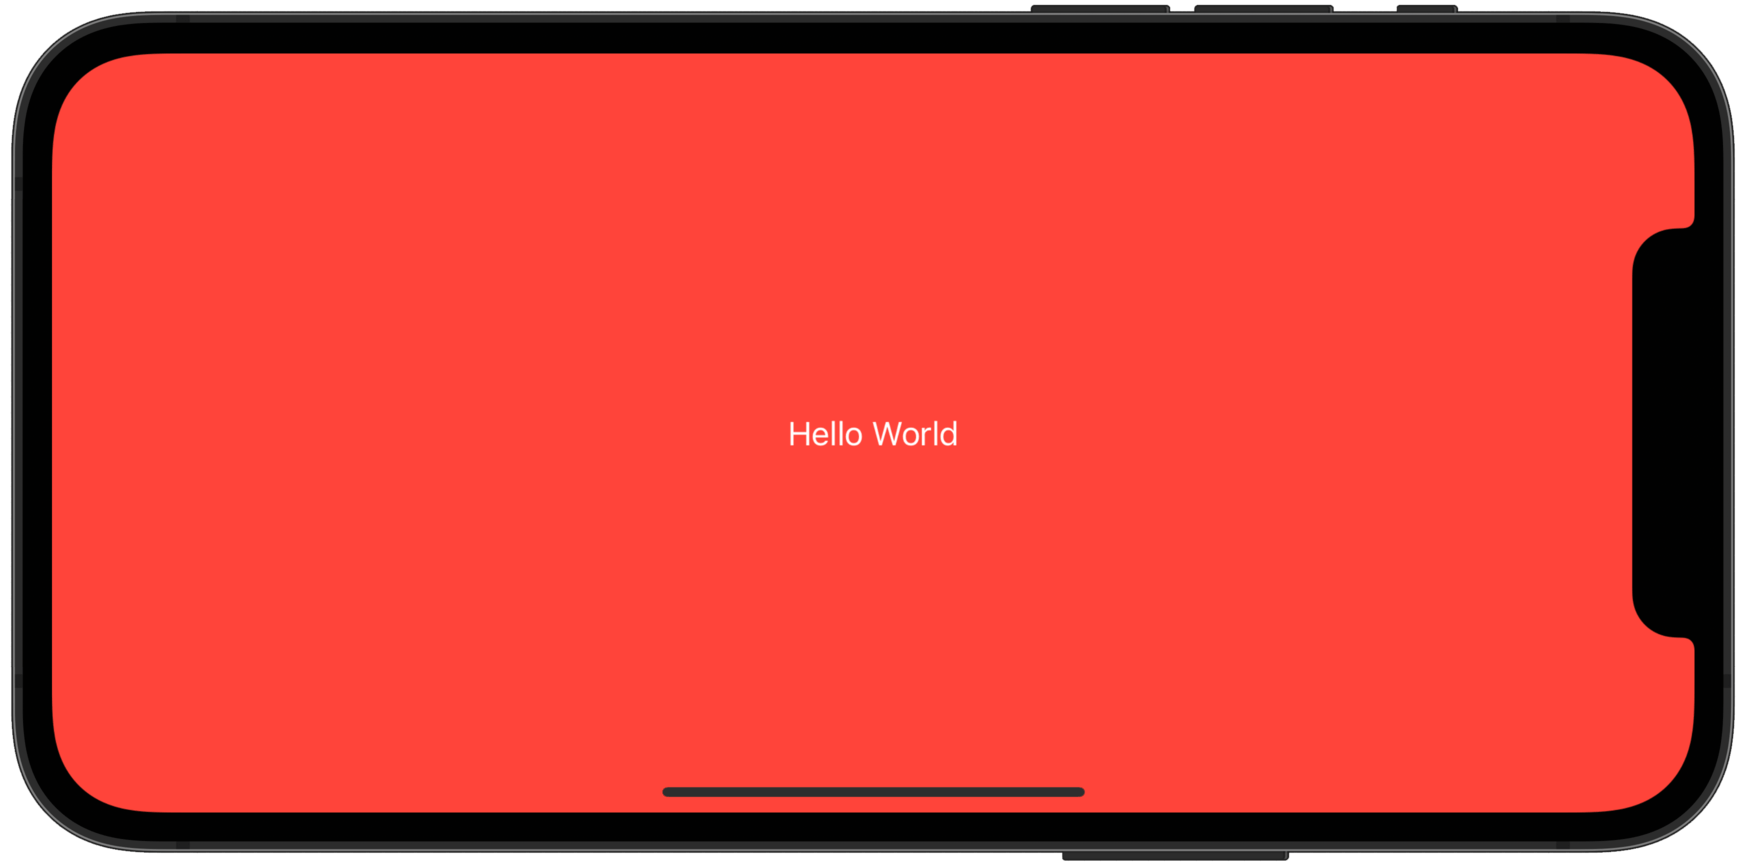 A phone showing the words “Hello World” over a red background which fills the screen.